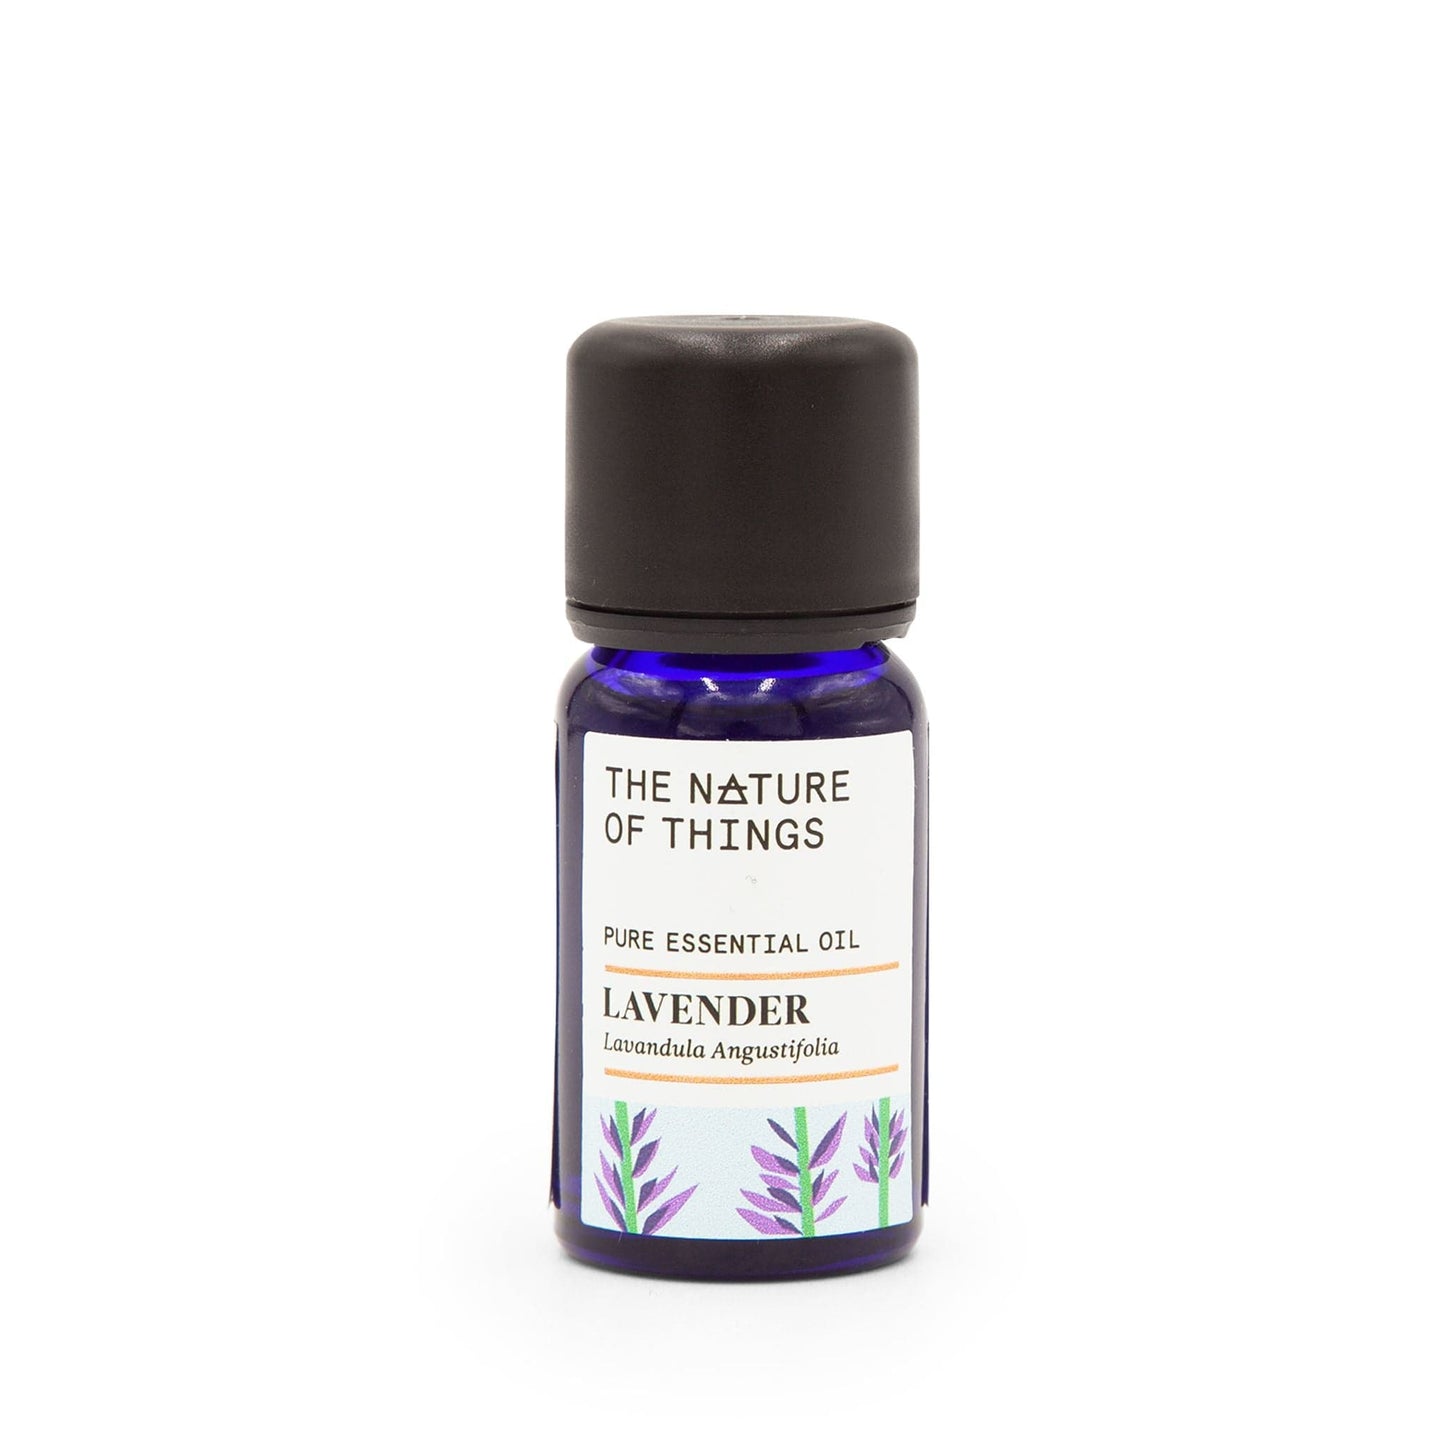 The Nature of Things Essential Oil Lavender Essential Oil 12ml - The Nature of Things